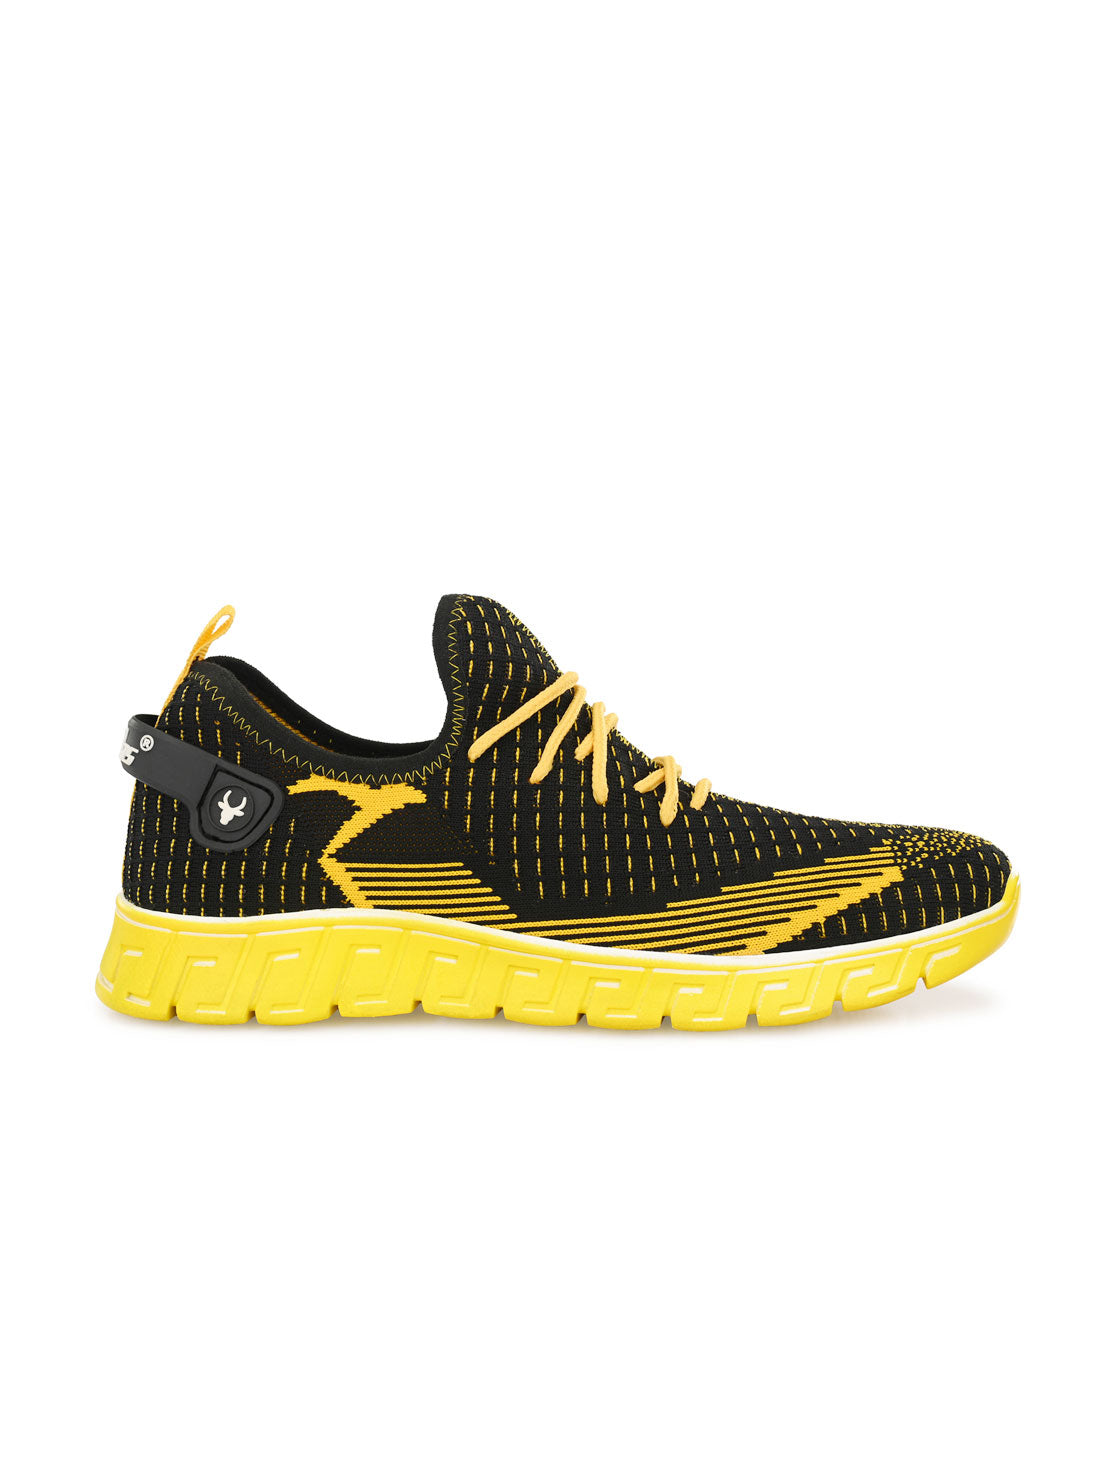 Hirolas® Men's Black/Yellow Knitted Athleisure Lace Up Sport Shoes (HRL2015YLW)